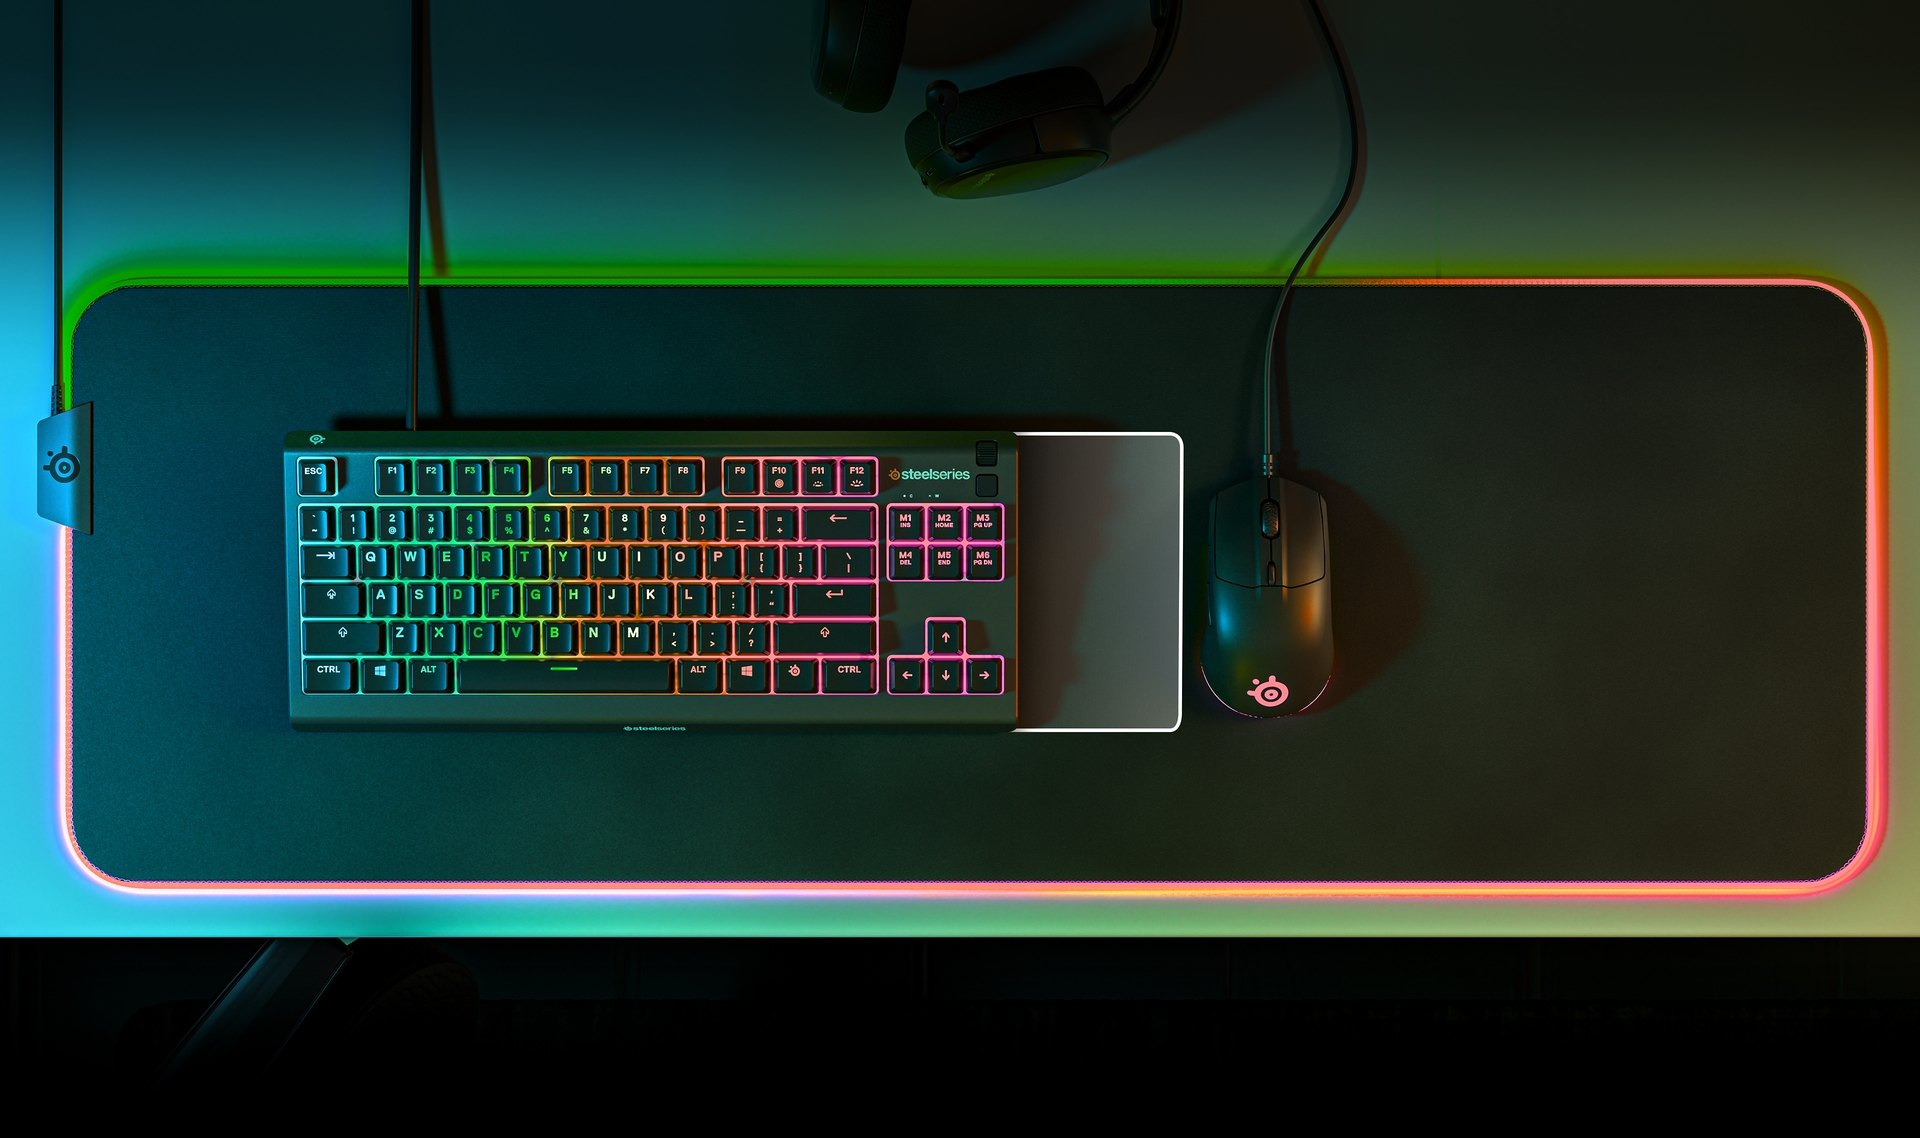 An Apex 3 TKL keyboard sits on an illuminated qck prism cloth mousepade, an Arctis headset, and a SteelSeries mouse. All illuminated in an even glow of RGB.